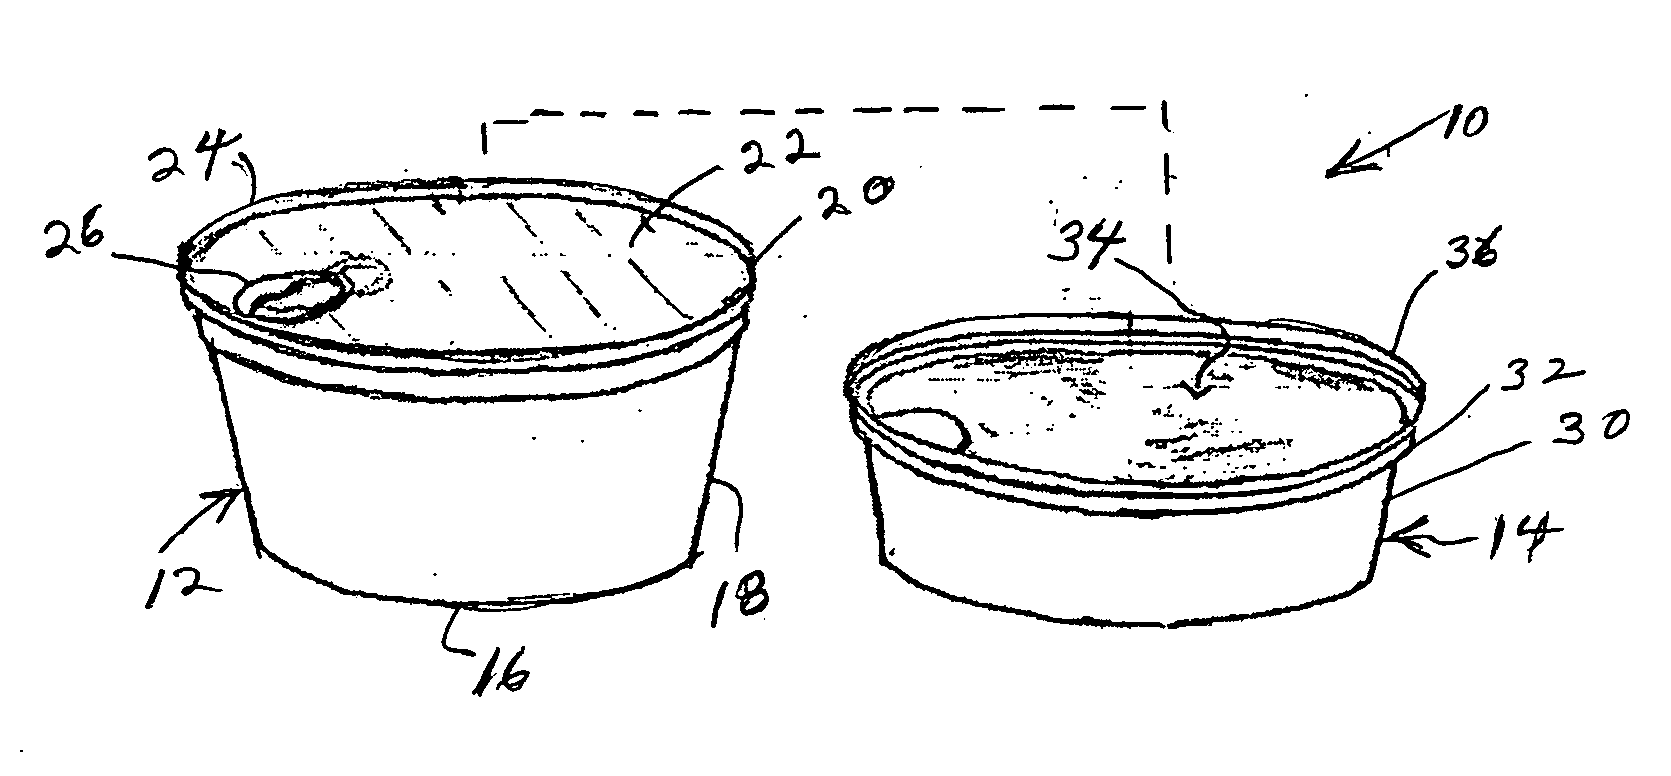 Process for packaging foods and packaged product